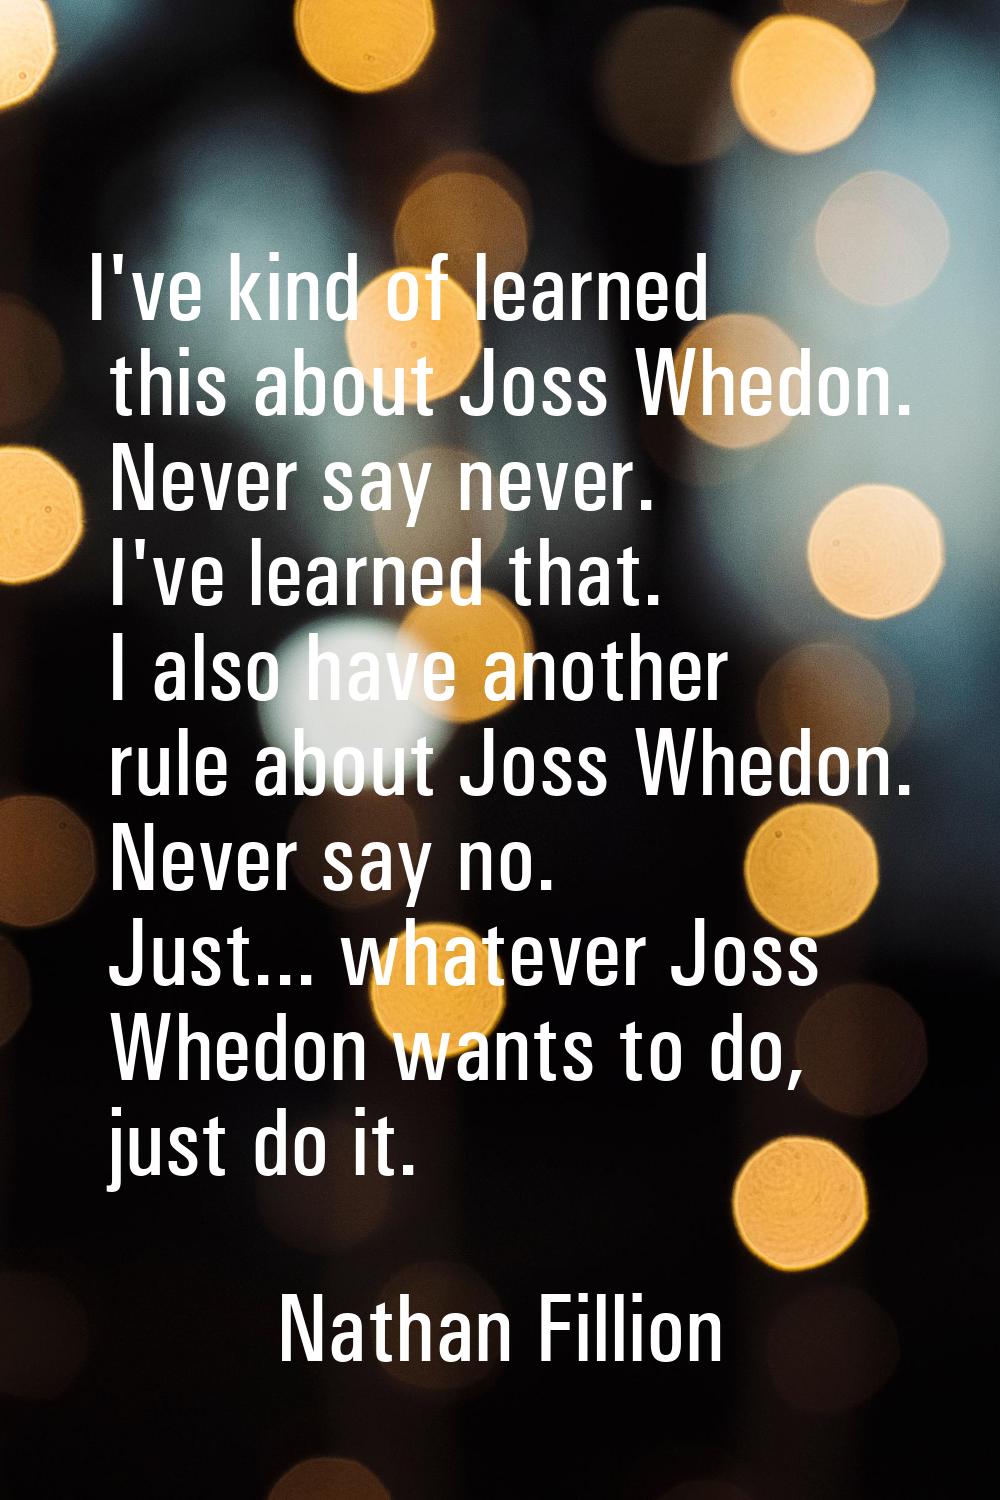 I've kind of learned this about Joss Whedon. Never say never. I've learned that. I also have anothe